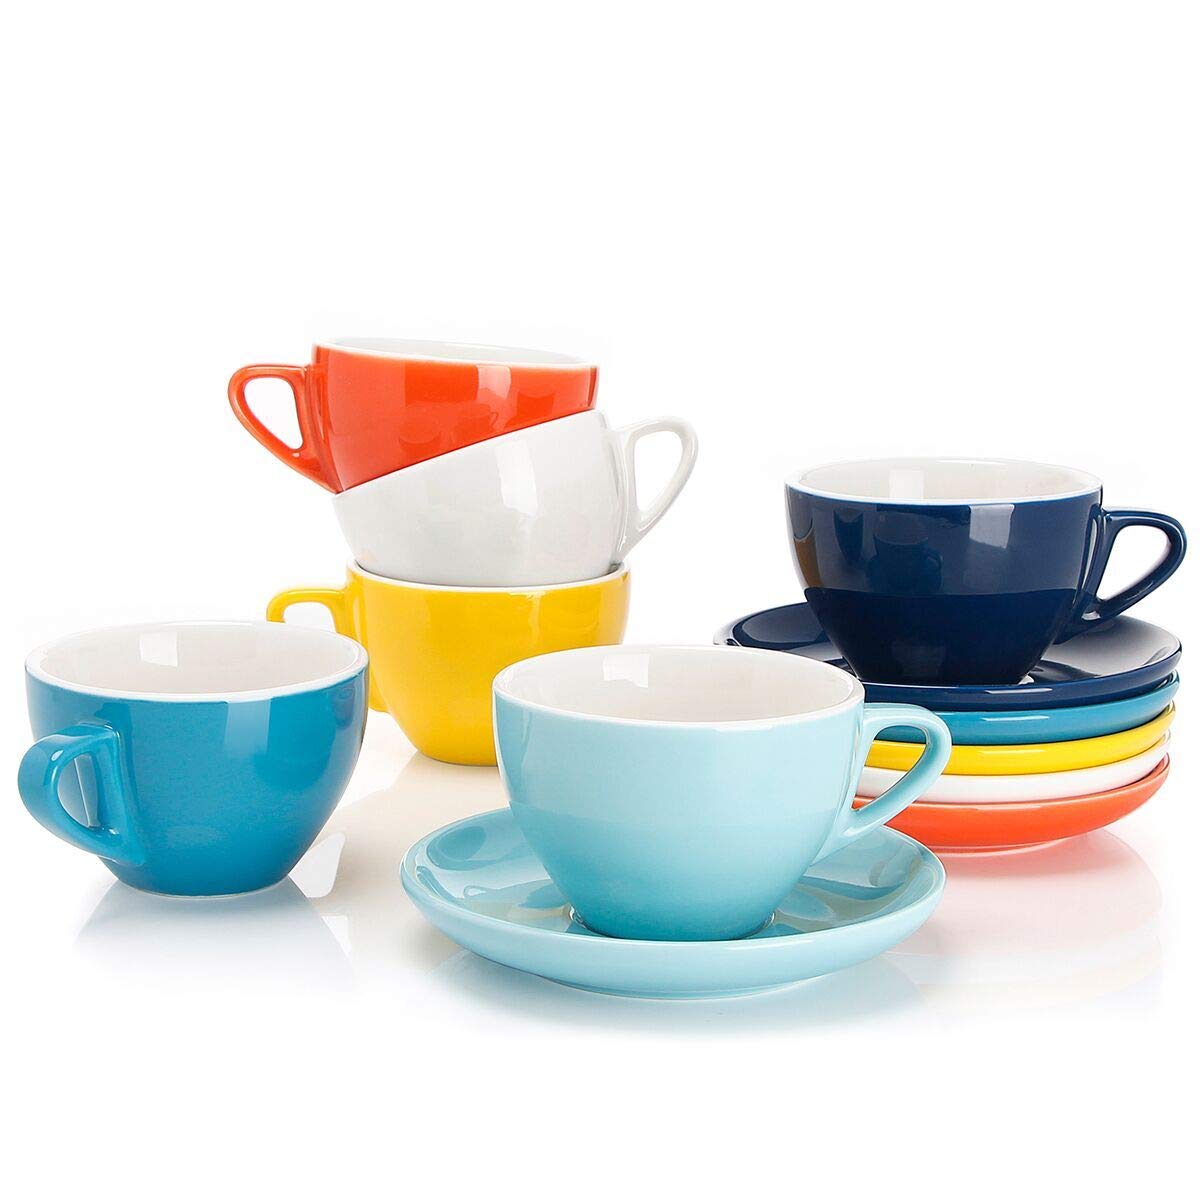 Sweese 403.001 Porcelain Cappuccino Cups